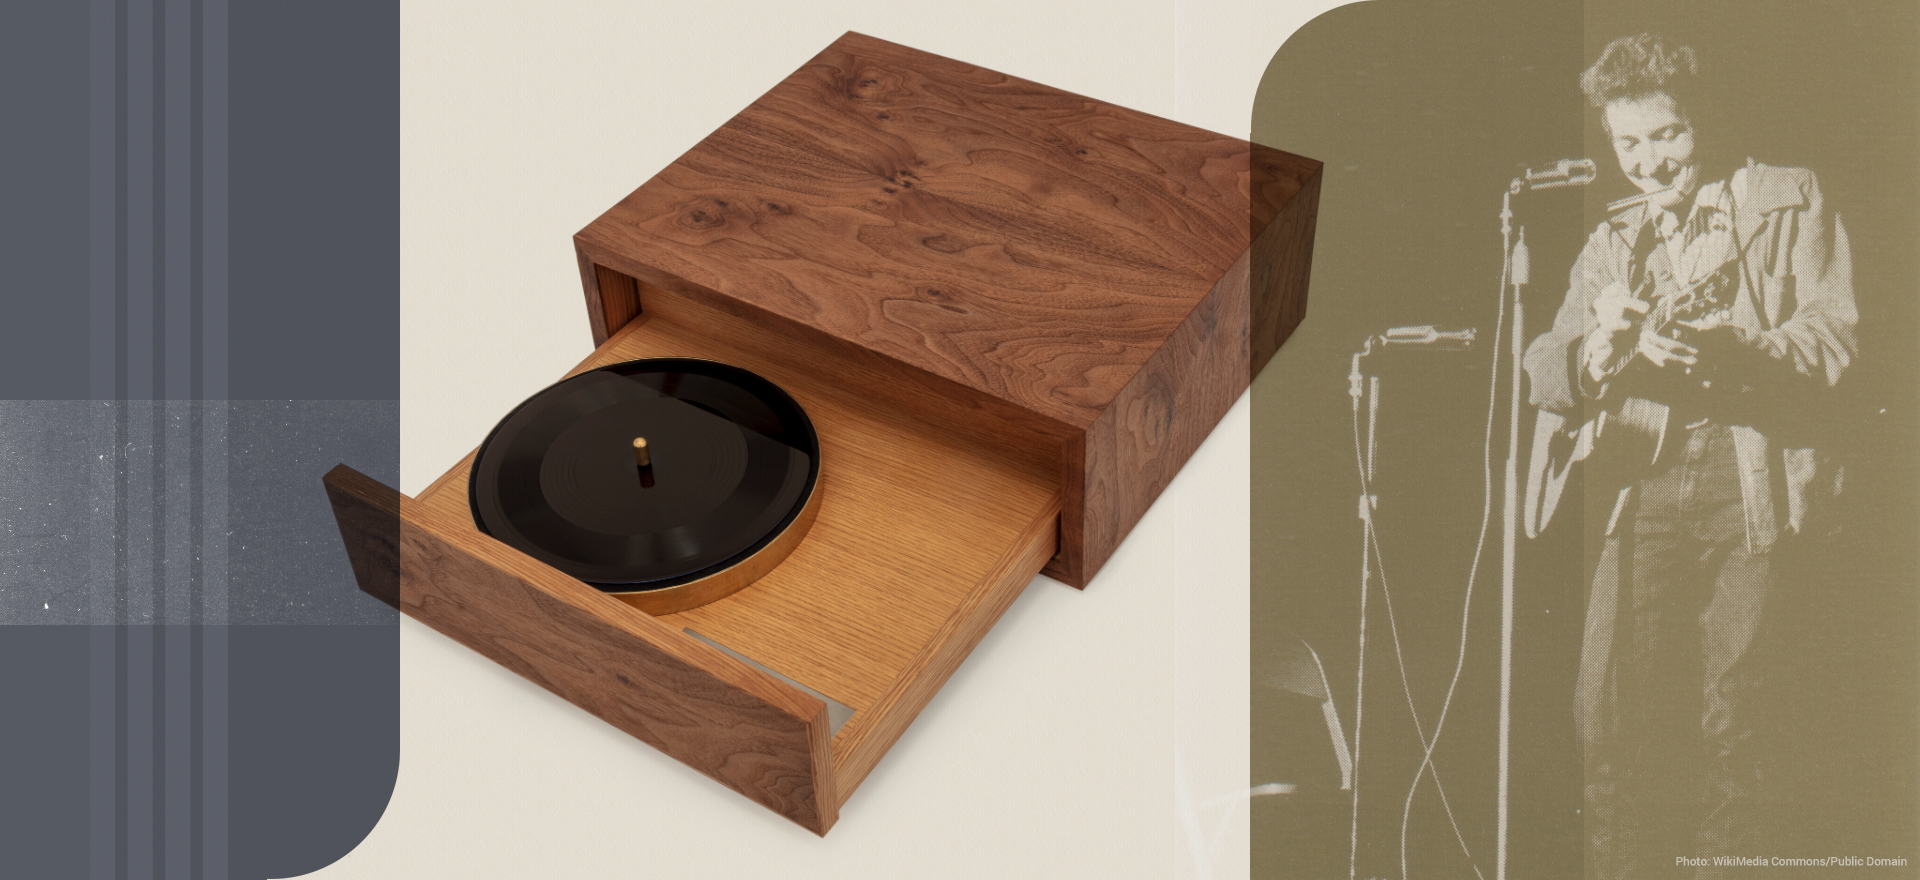 wooden turntable in case opened to reveal record